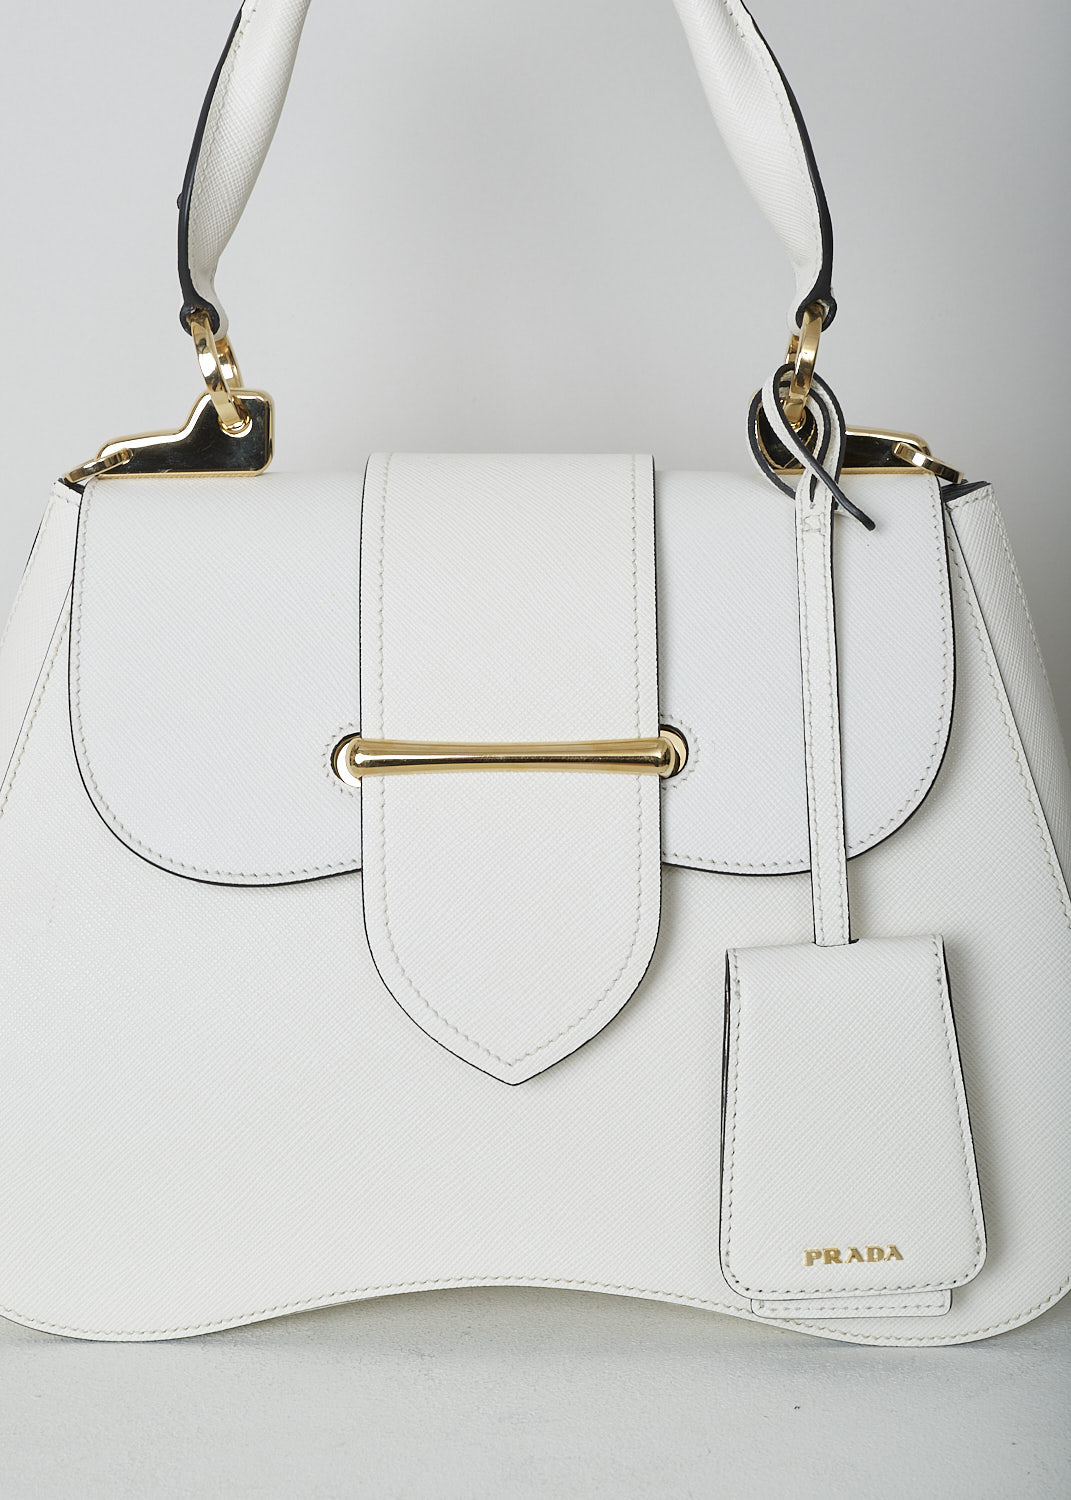 PRADA, MEDIUM SIDONIE TOP HANDLE BAG IN WHITE, CARTELLA_1BN005_F0009_BIANCO, White, Detail, This mid-sized white Sidonie Top Handle Bag is made with Saffiano leather. The bag comes with a leather handle and an adjustable and detachable shoulder strap. The bag has gold-tone metal hardware with the brand's logo on the back. The removable leather keychain has that same gold-tone logo on it. The slip-through closure opens up to reveal its black interior. The bag has a single, spacious compartment with a zipped inner pocket to one side and a patch pocket on the other side.  
